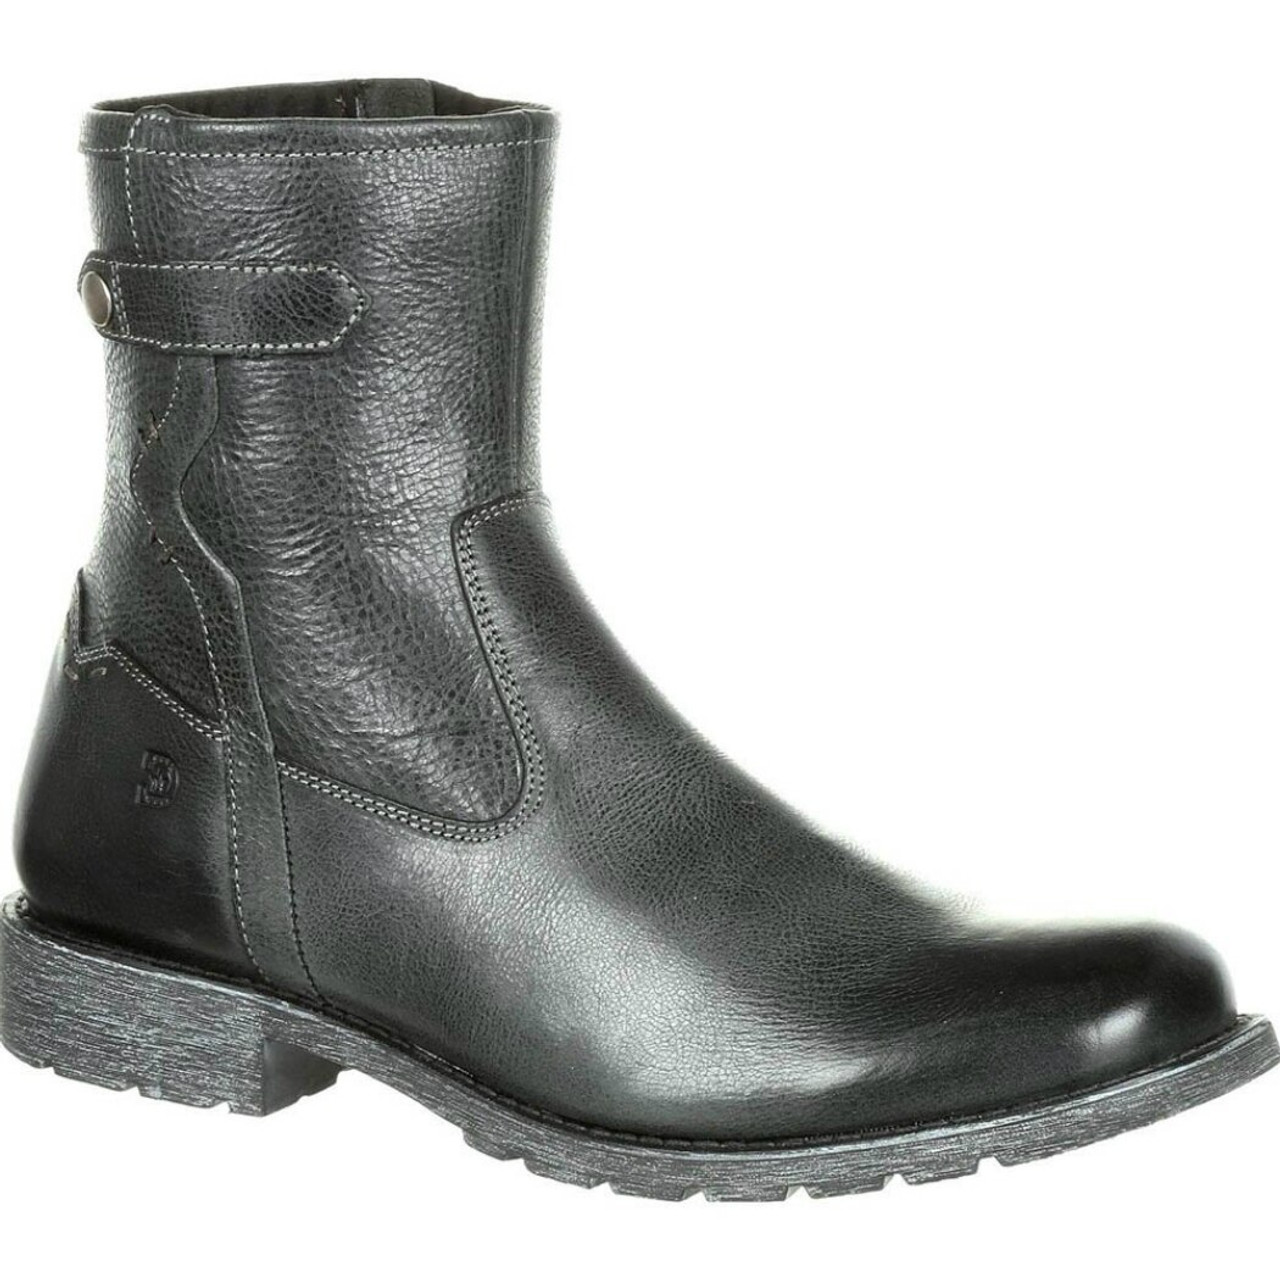 mens side zip leather boots